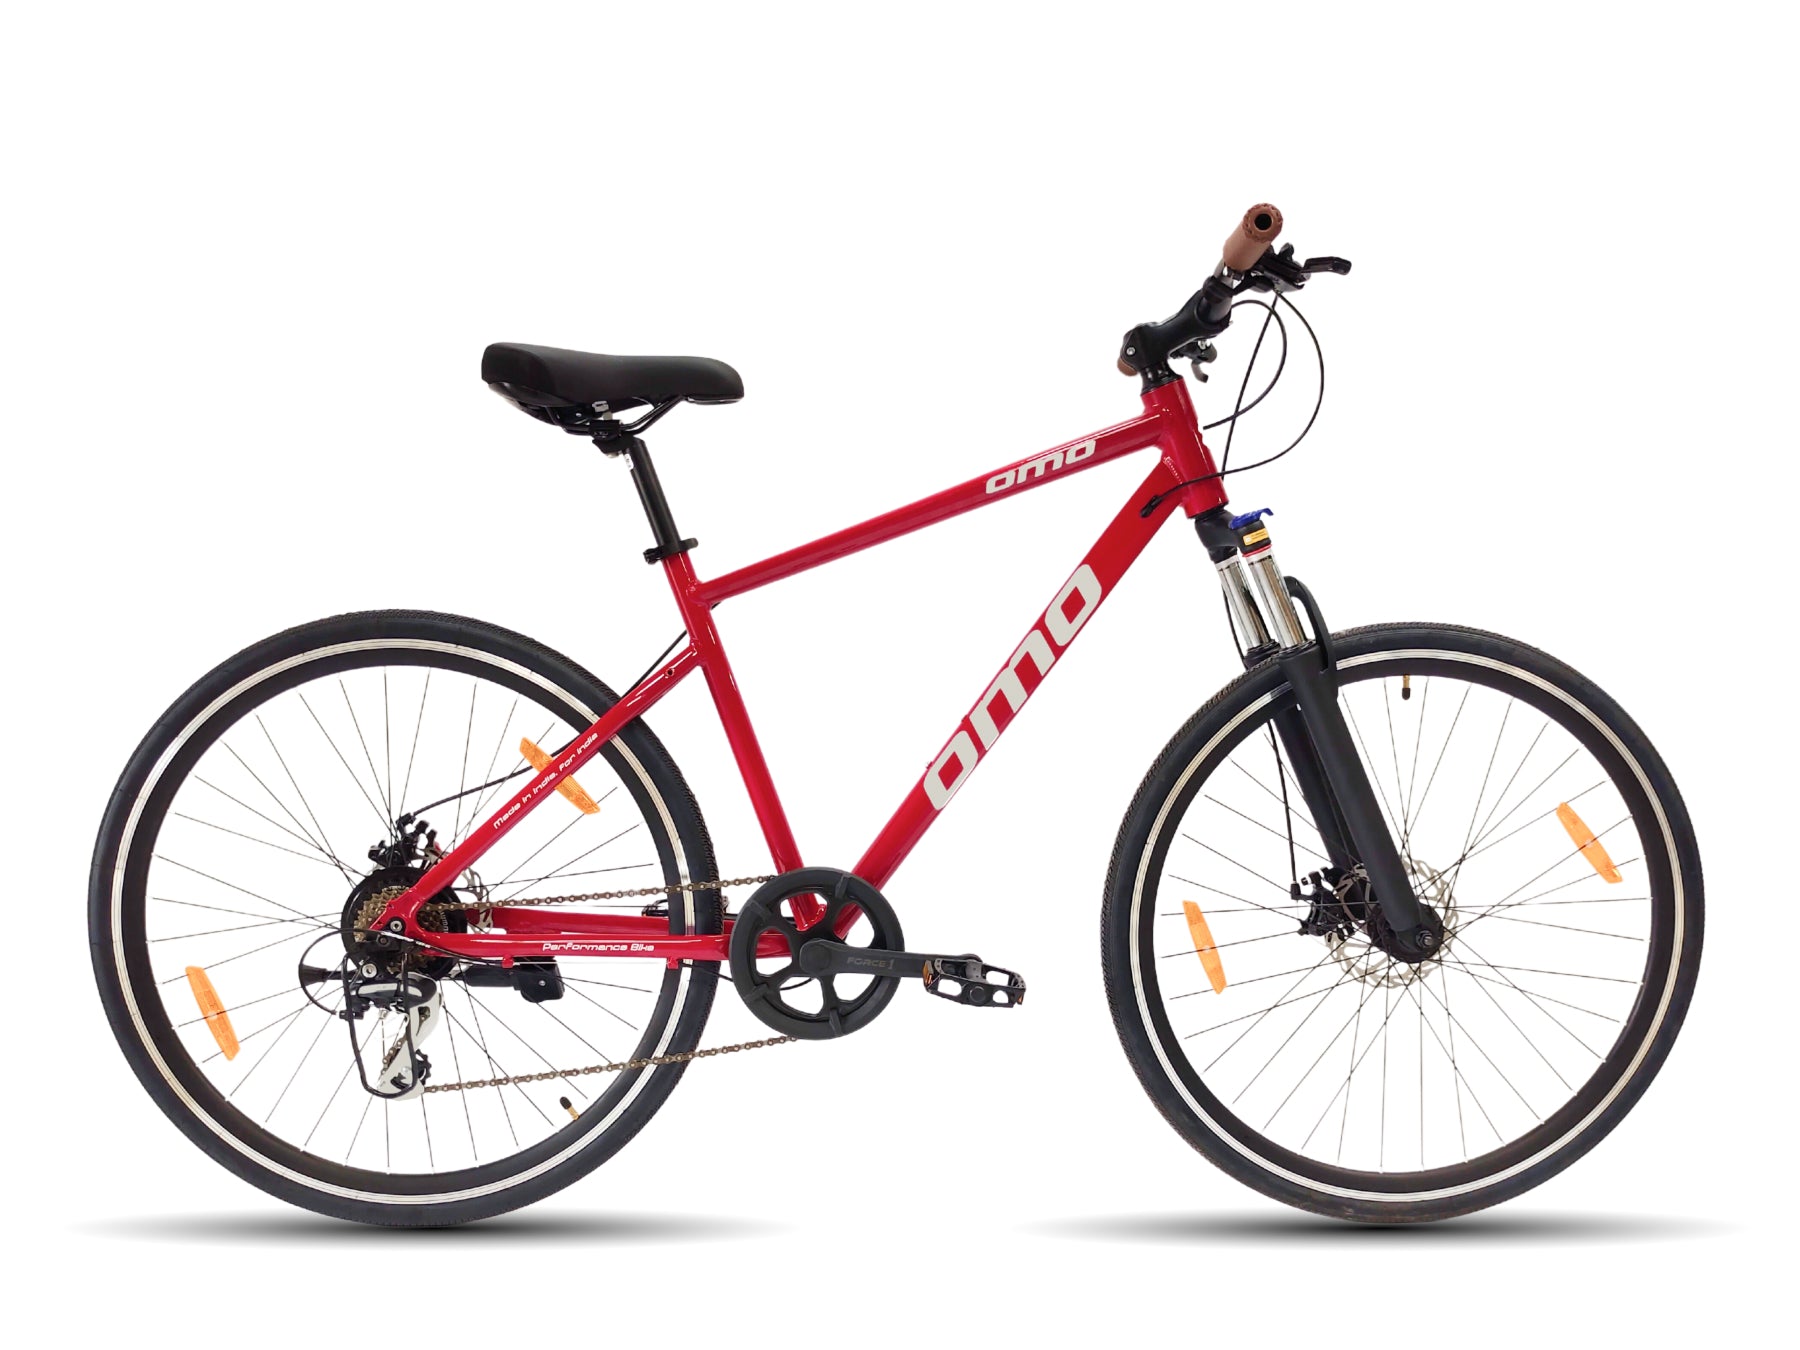 ladakh x geared hybrid bike alloy frame 700c with shimano gears and lockout preload suspension red color 